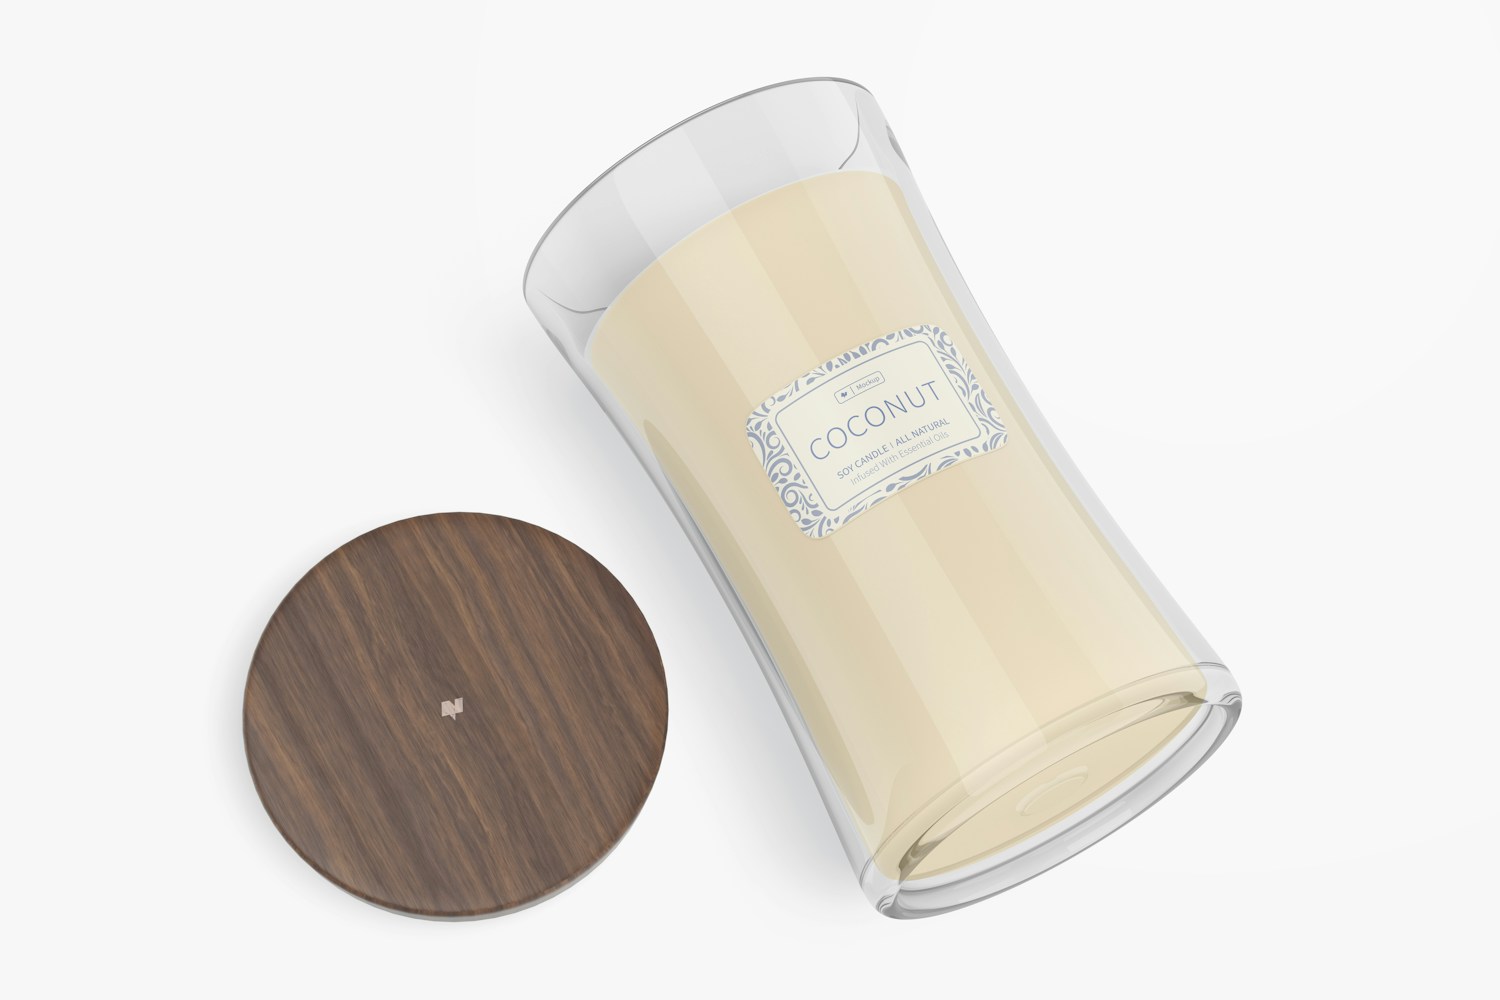 Glass Candle Jars with Lid Mockup, Top View